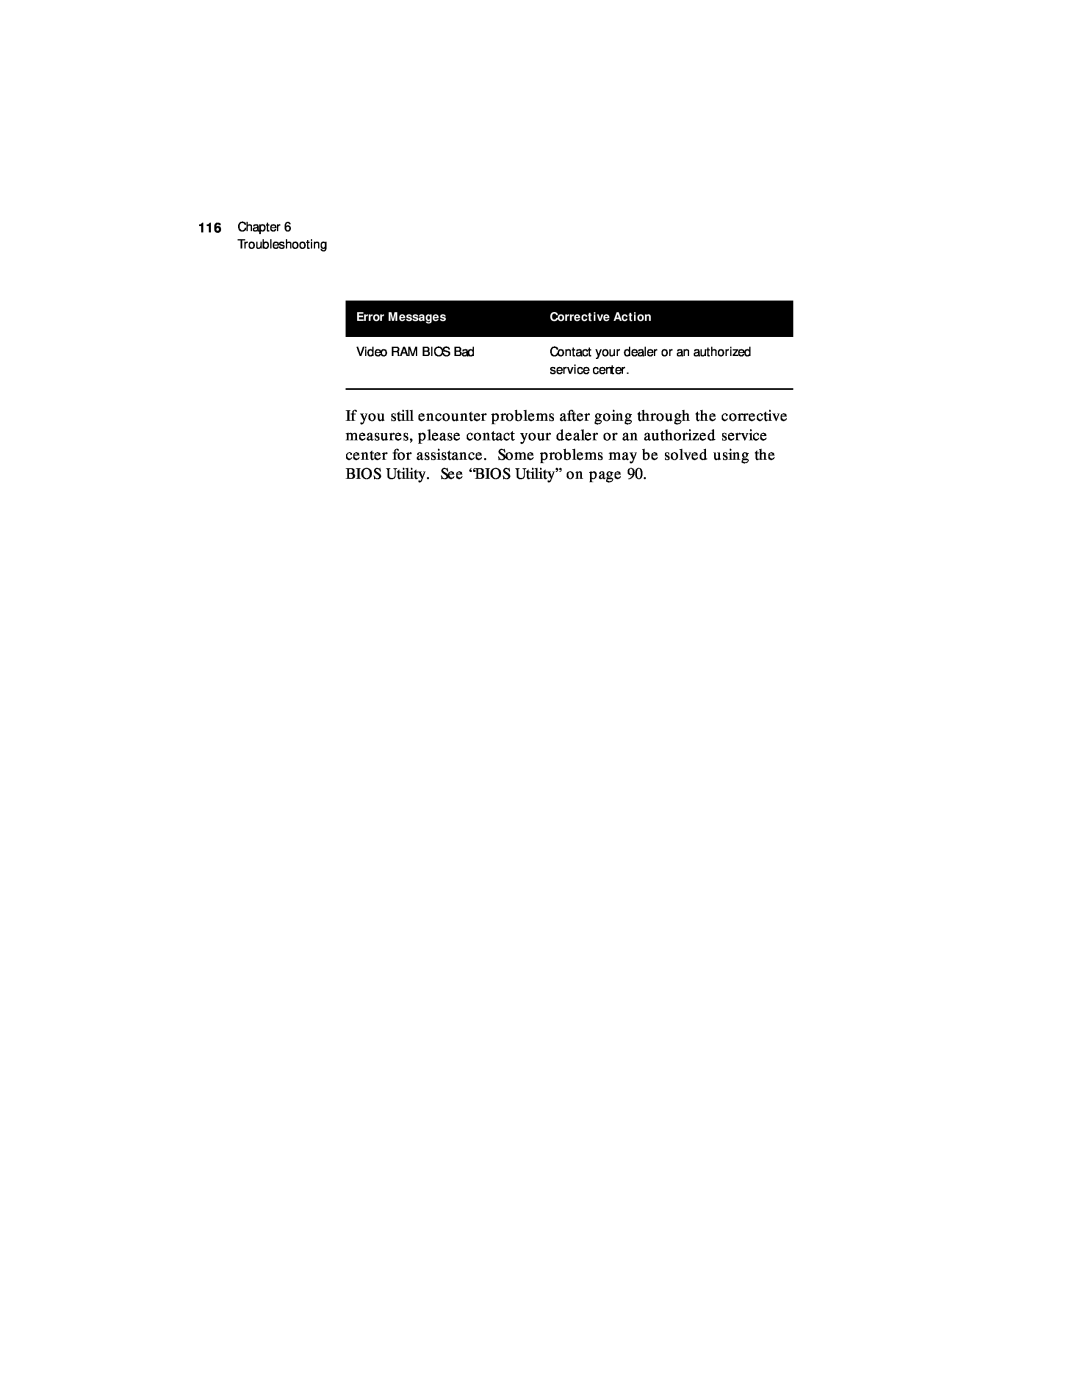 Acer 330 Series manual Error Messages, Corrective Action, Troubleshooting 